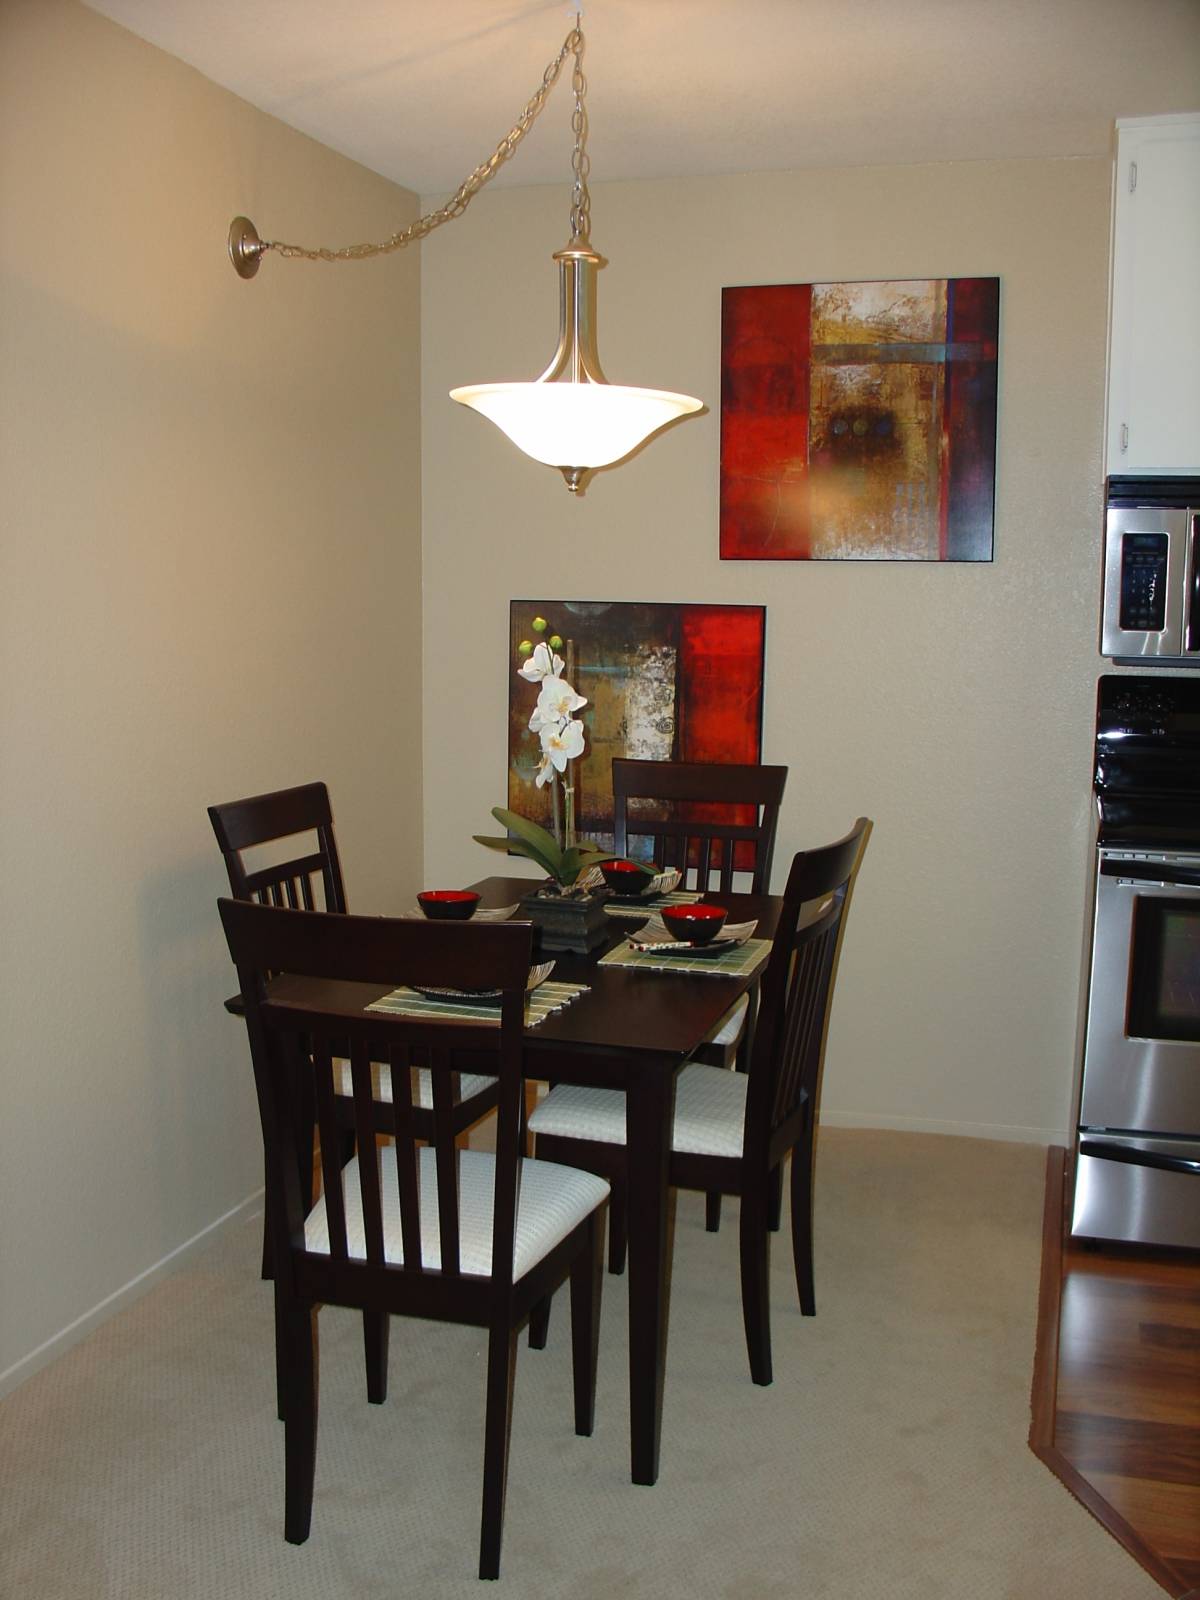 How To Make Dining Room Decorating Ideas To Get Your Home Looking